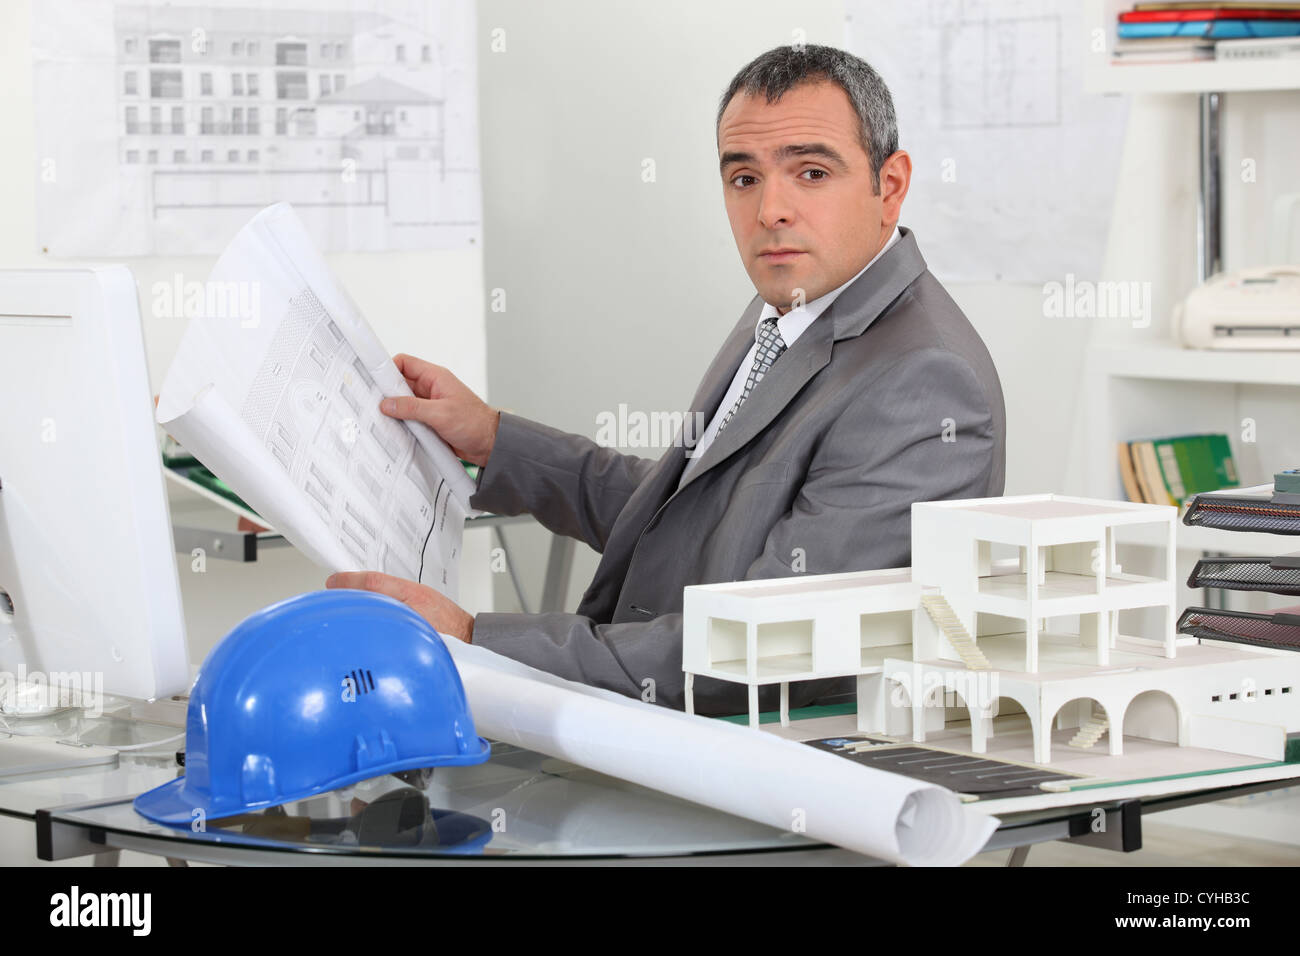 Man with plans Stock Photo